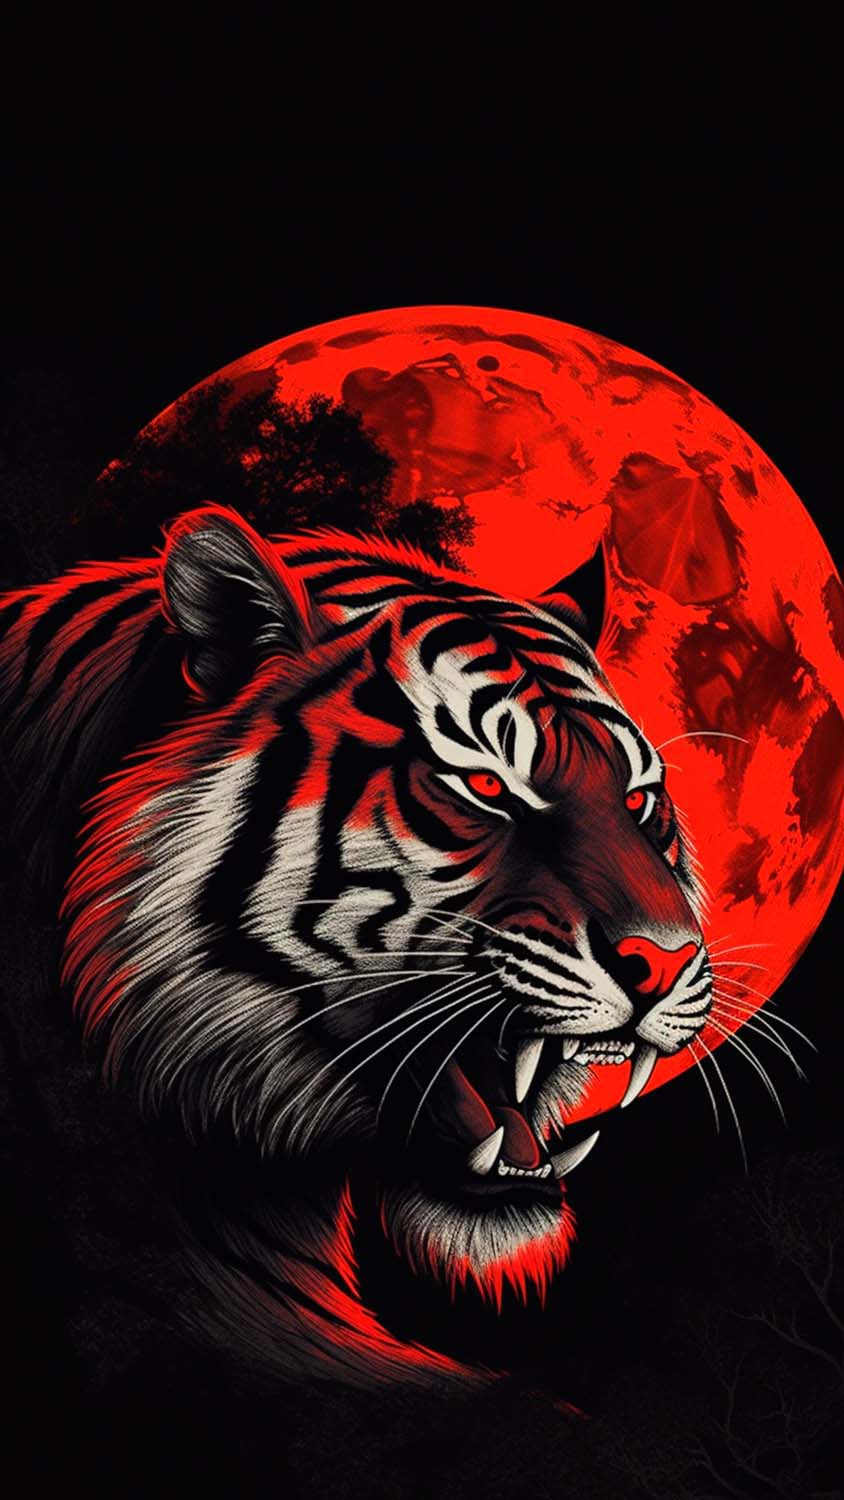 Red Moon Tiger iPhone Wallpaper 4K  iPhone Wallpapers